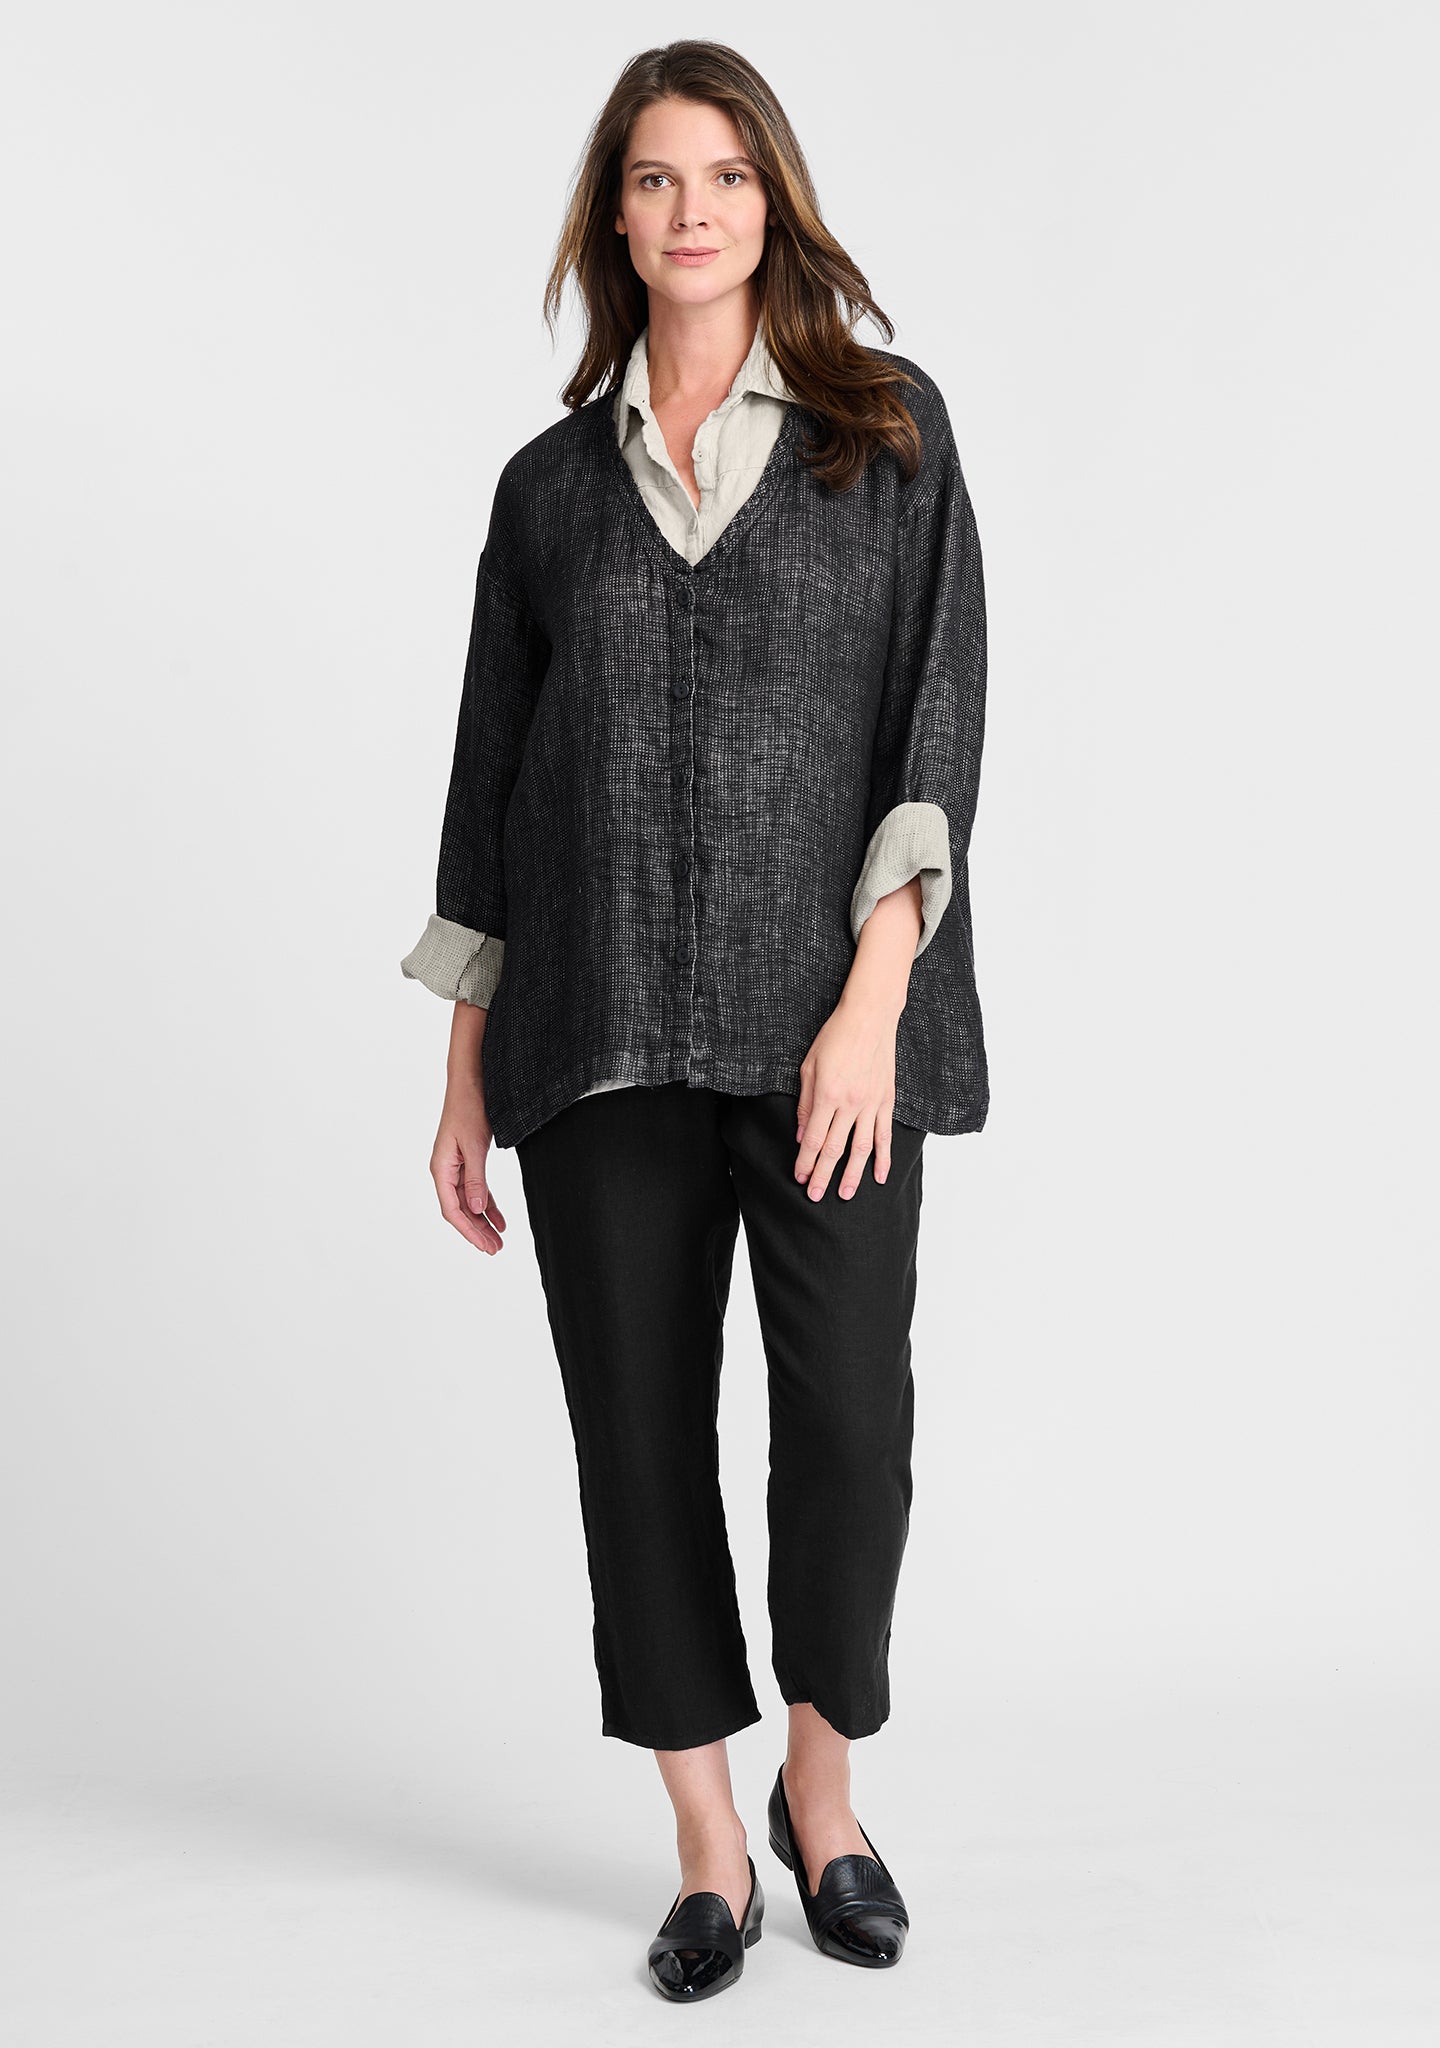 FLAX linen jacket in black with linen shirt in natural and linen pants in black